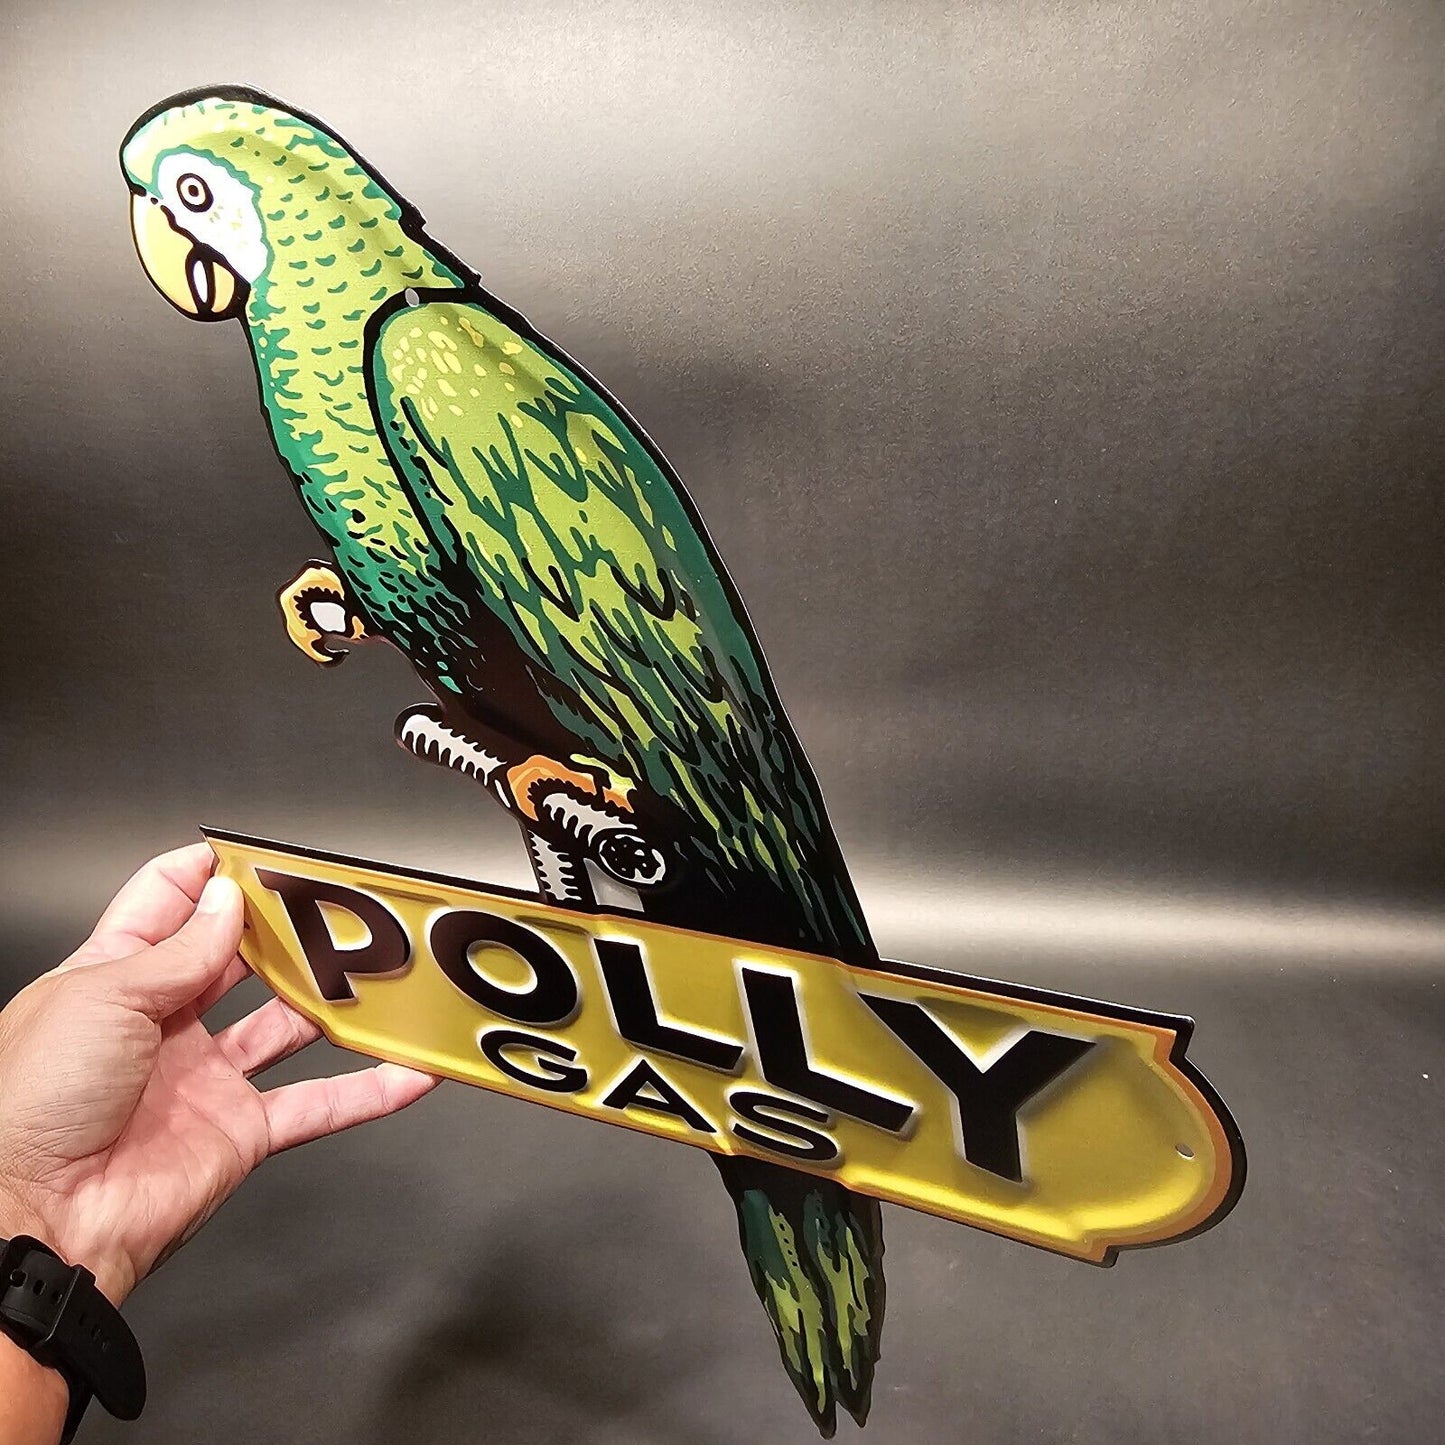 18"  Vintage Style Metal Polly Gas Car Sign